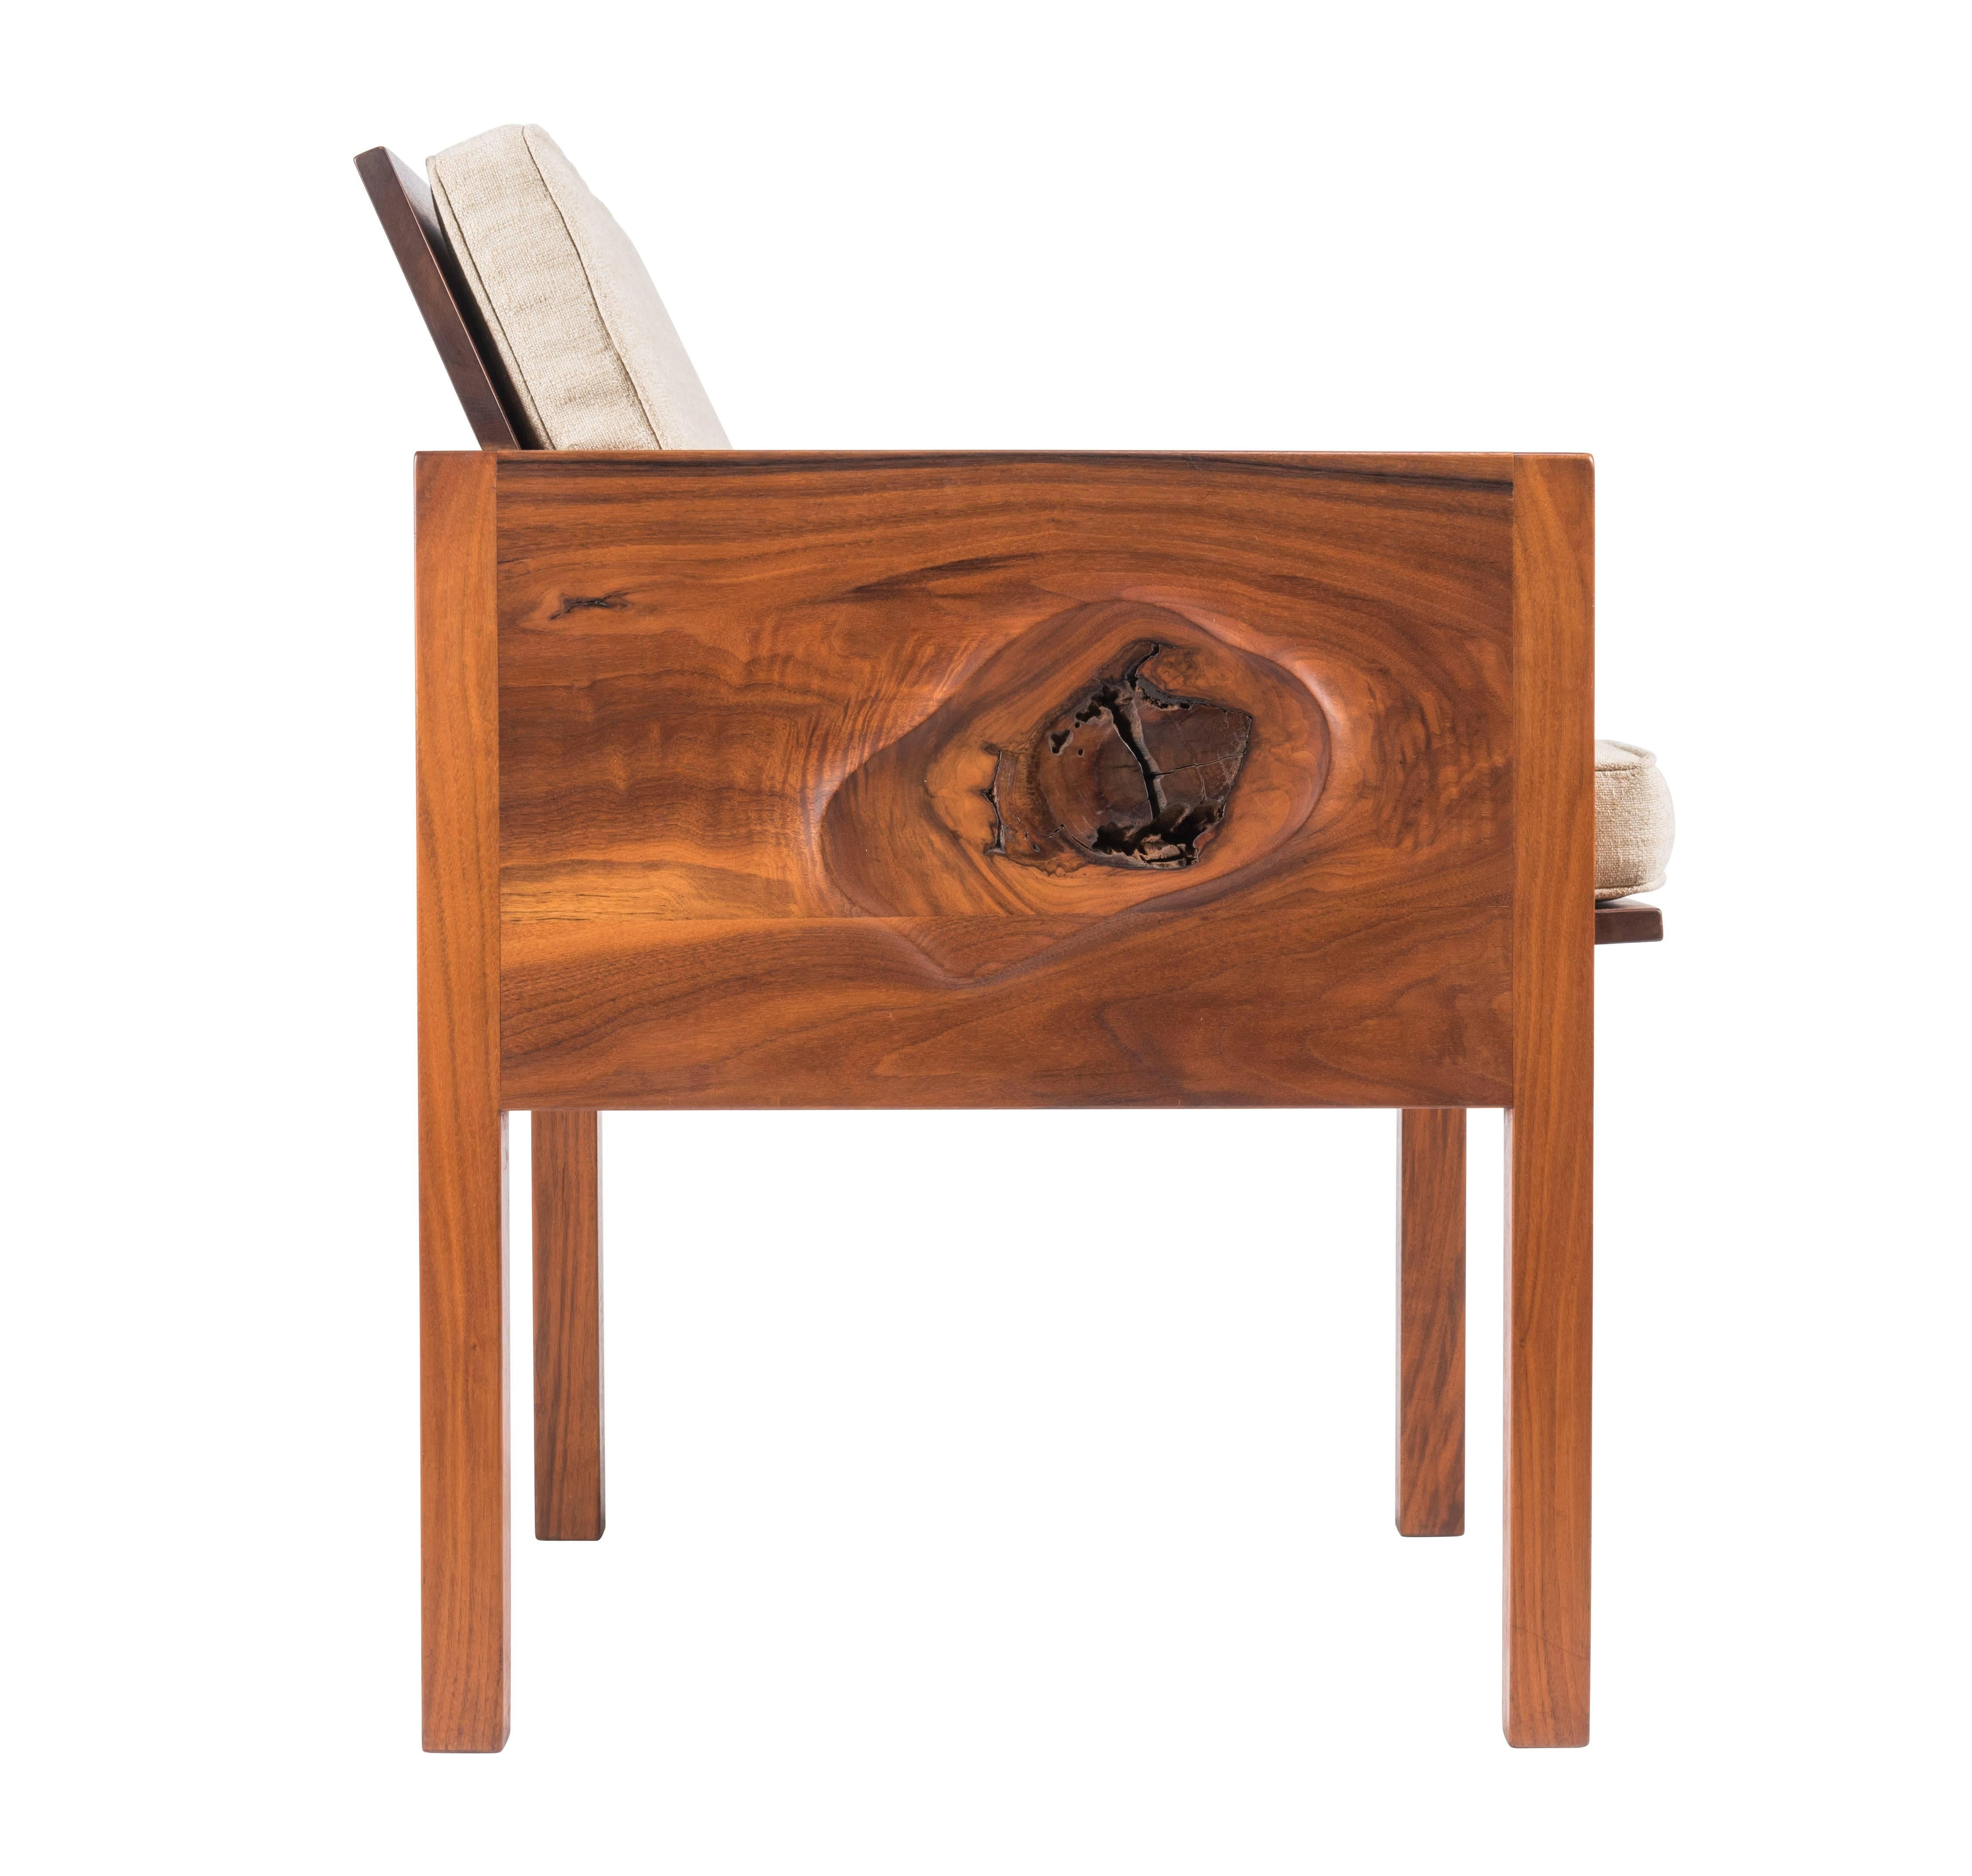 Hand-carved walnut occasional chair by Robert Whitley. This chair and the following listing are from a single owner named Florence Green, who commissioned Whitley to create a large collection of his work between 1965-1975 for her home in PA. Chair